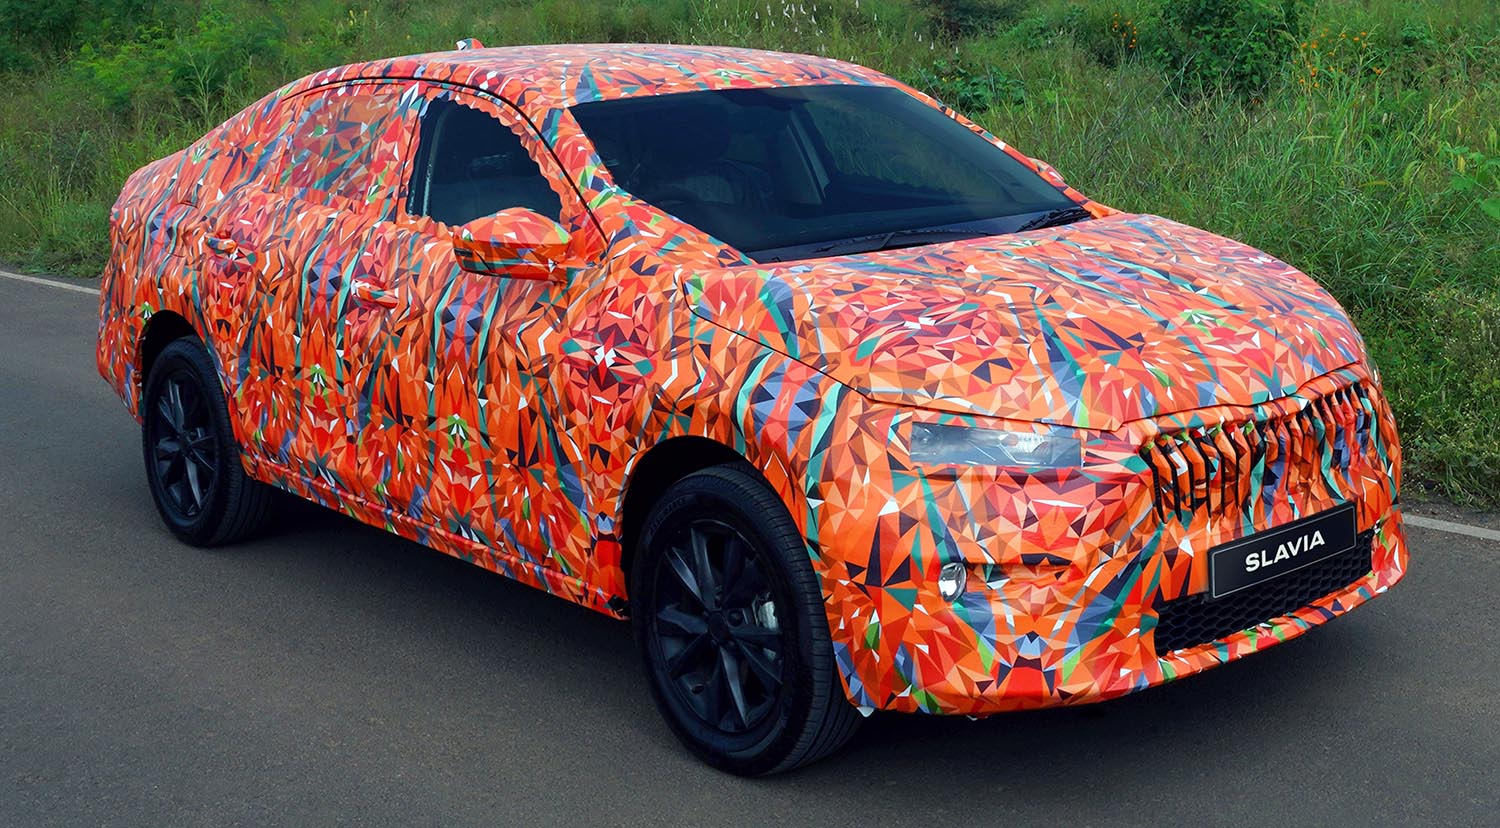 Camouflage Wrap For New ŠKODA SLAVIA Is The Result Of A Design Contest